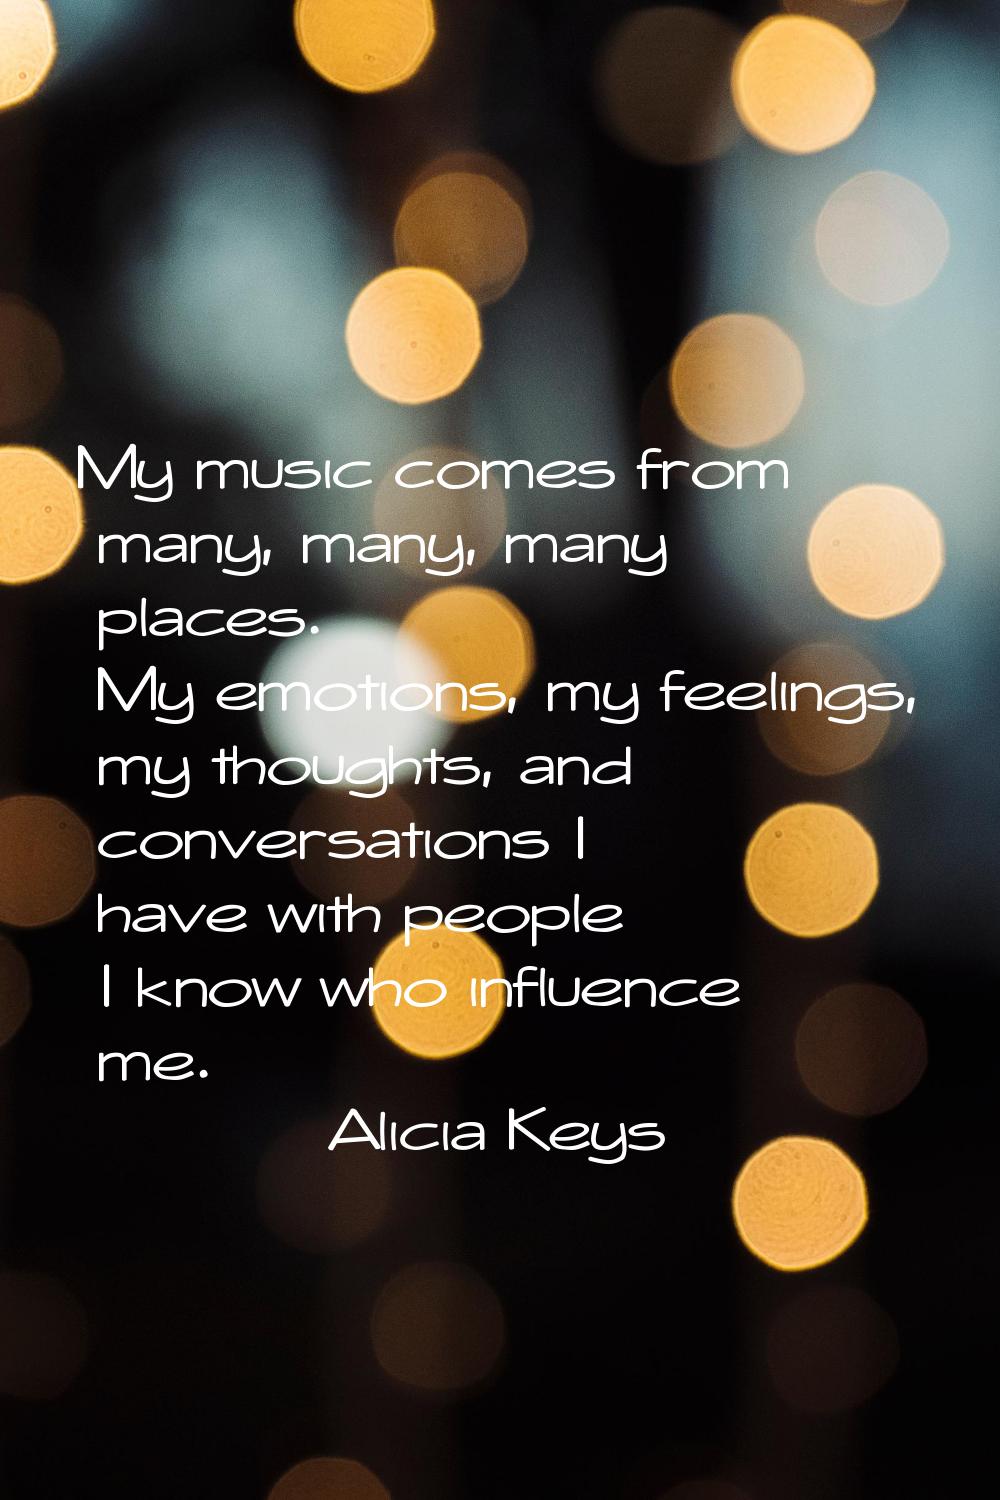 My music comes from many, many, many places. My emotions, my feelings, my thoughts, and conversatio